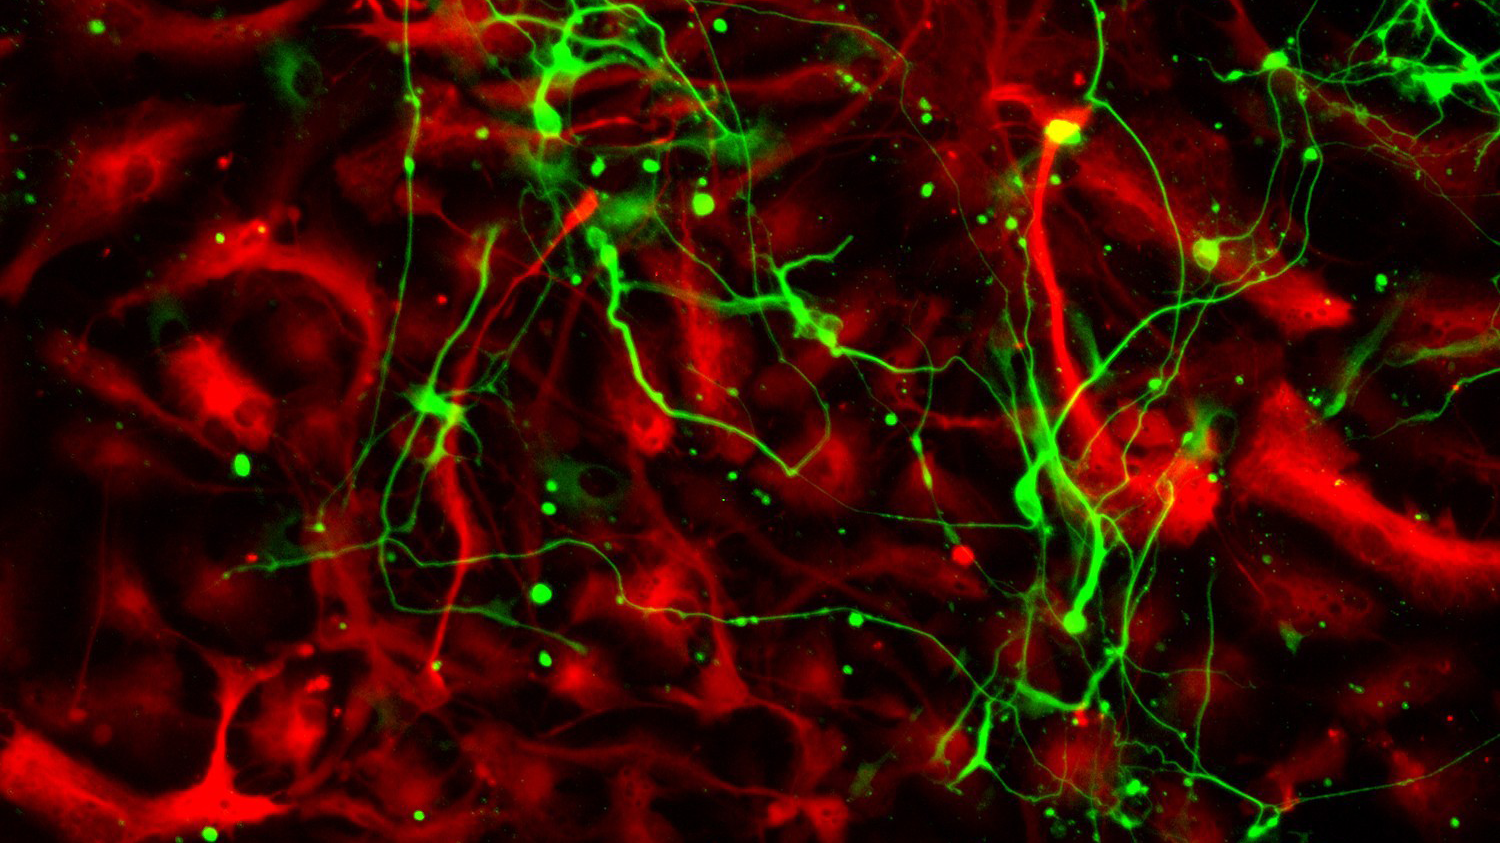 Image of astrocytes in red and some green